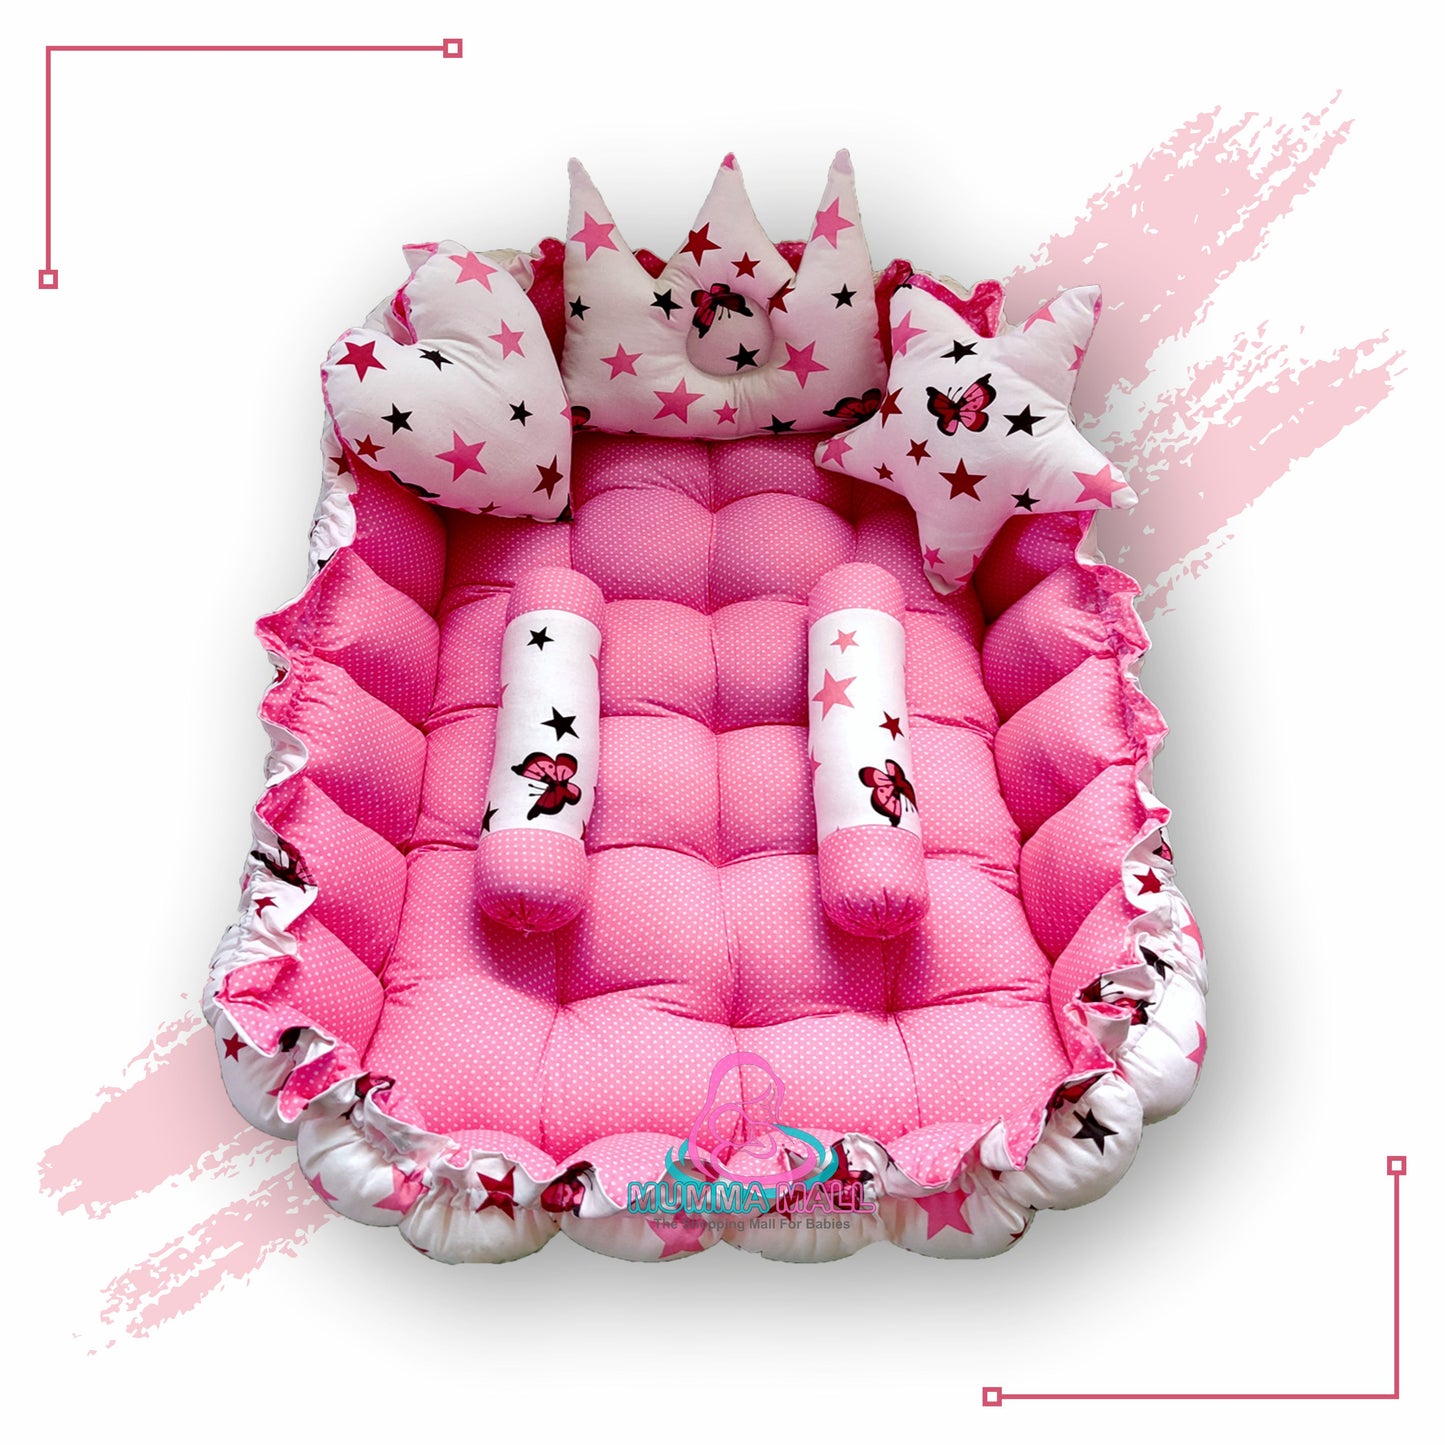 Rectangle baby tub bed with blanket and set of 5 pillows as neck support, side support and toy (Pink and White)